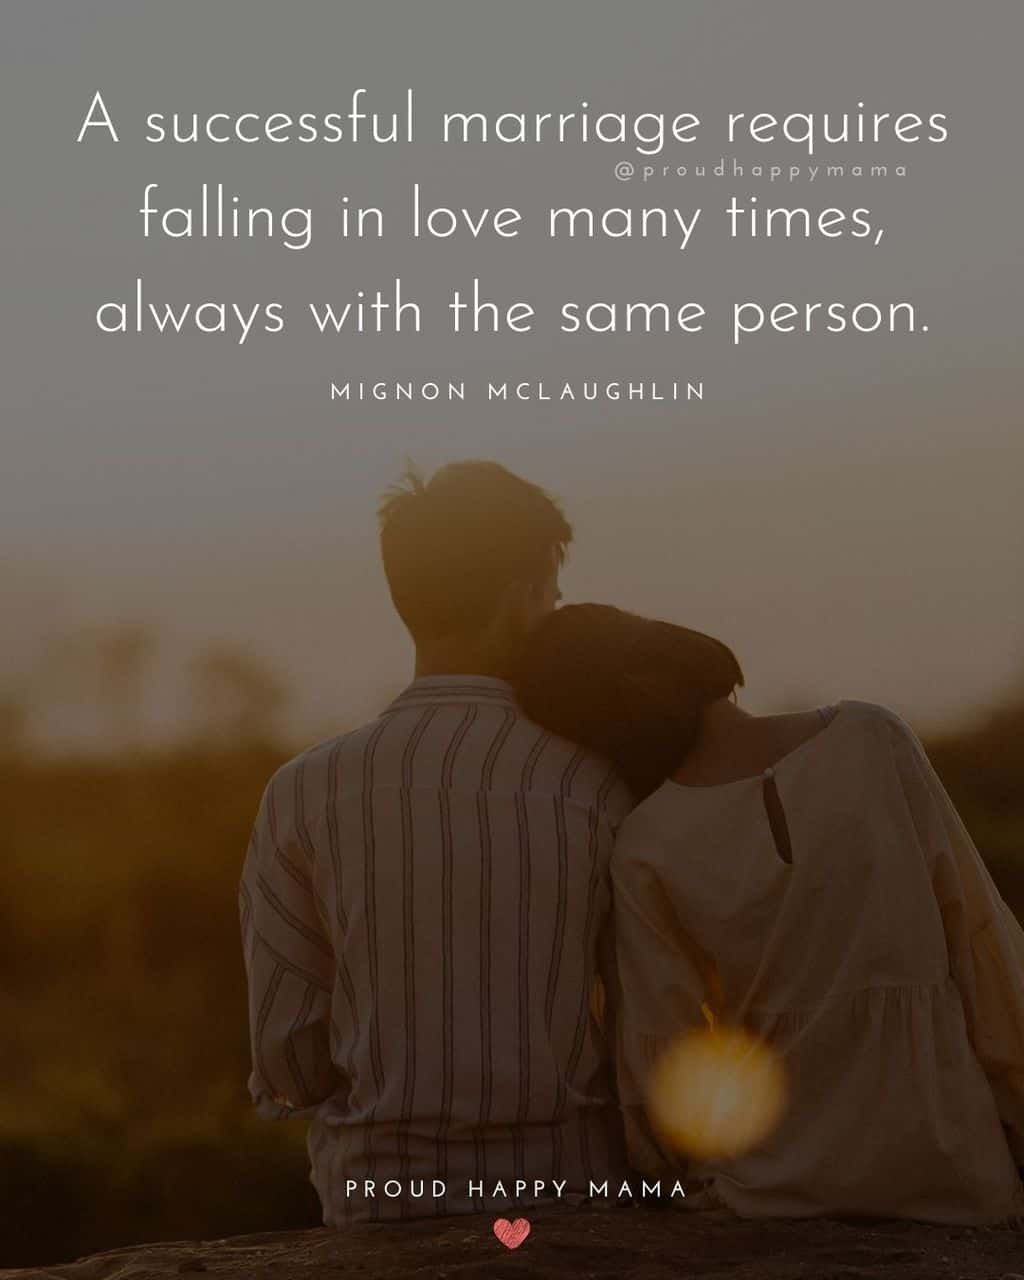 https://proudhappymama.com/wp-content/uploads/2021/01/Marriage-Quotes-A-successful-marriage-requires-falling-in-love-many-times-always-with-the-same-person..jpg